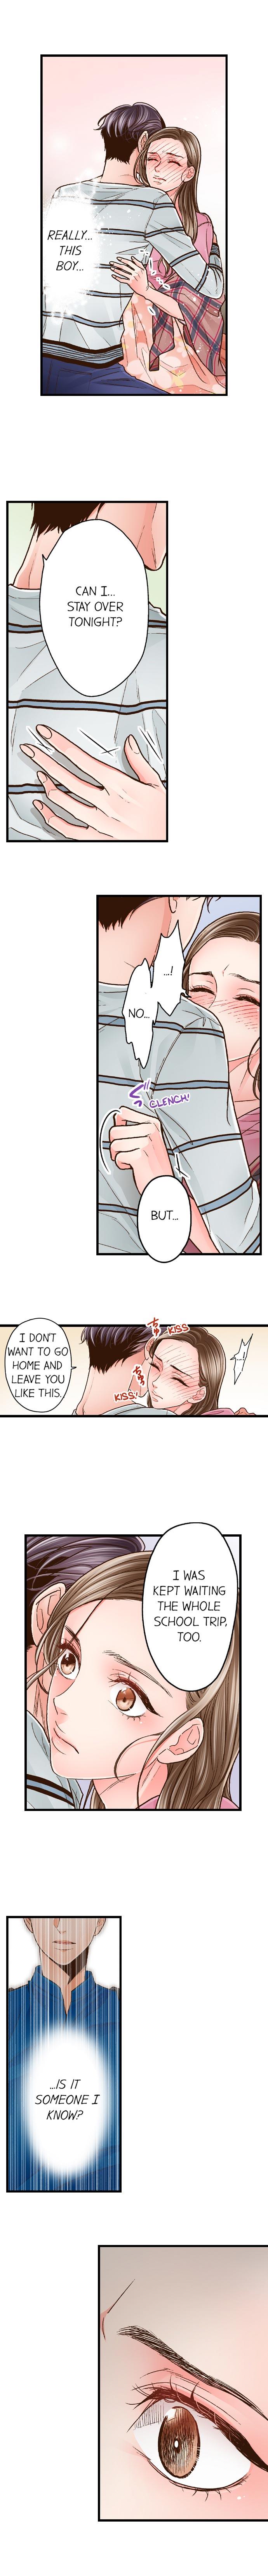 Yanagihara Is a Sex Addict - Chapter 51 Page 3